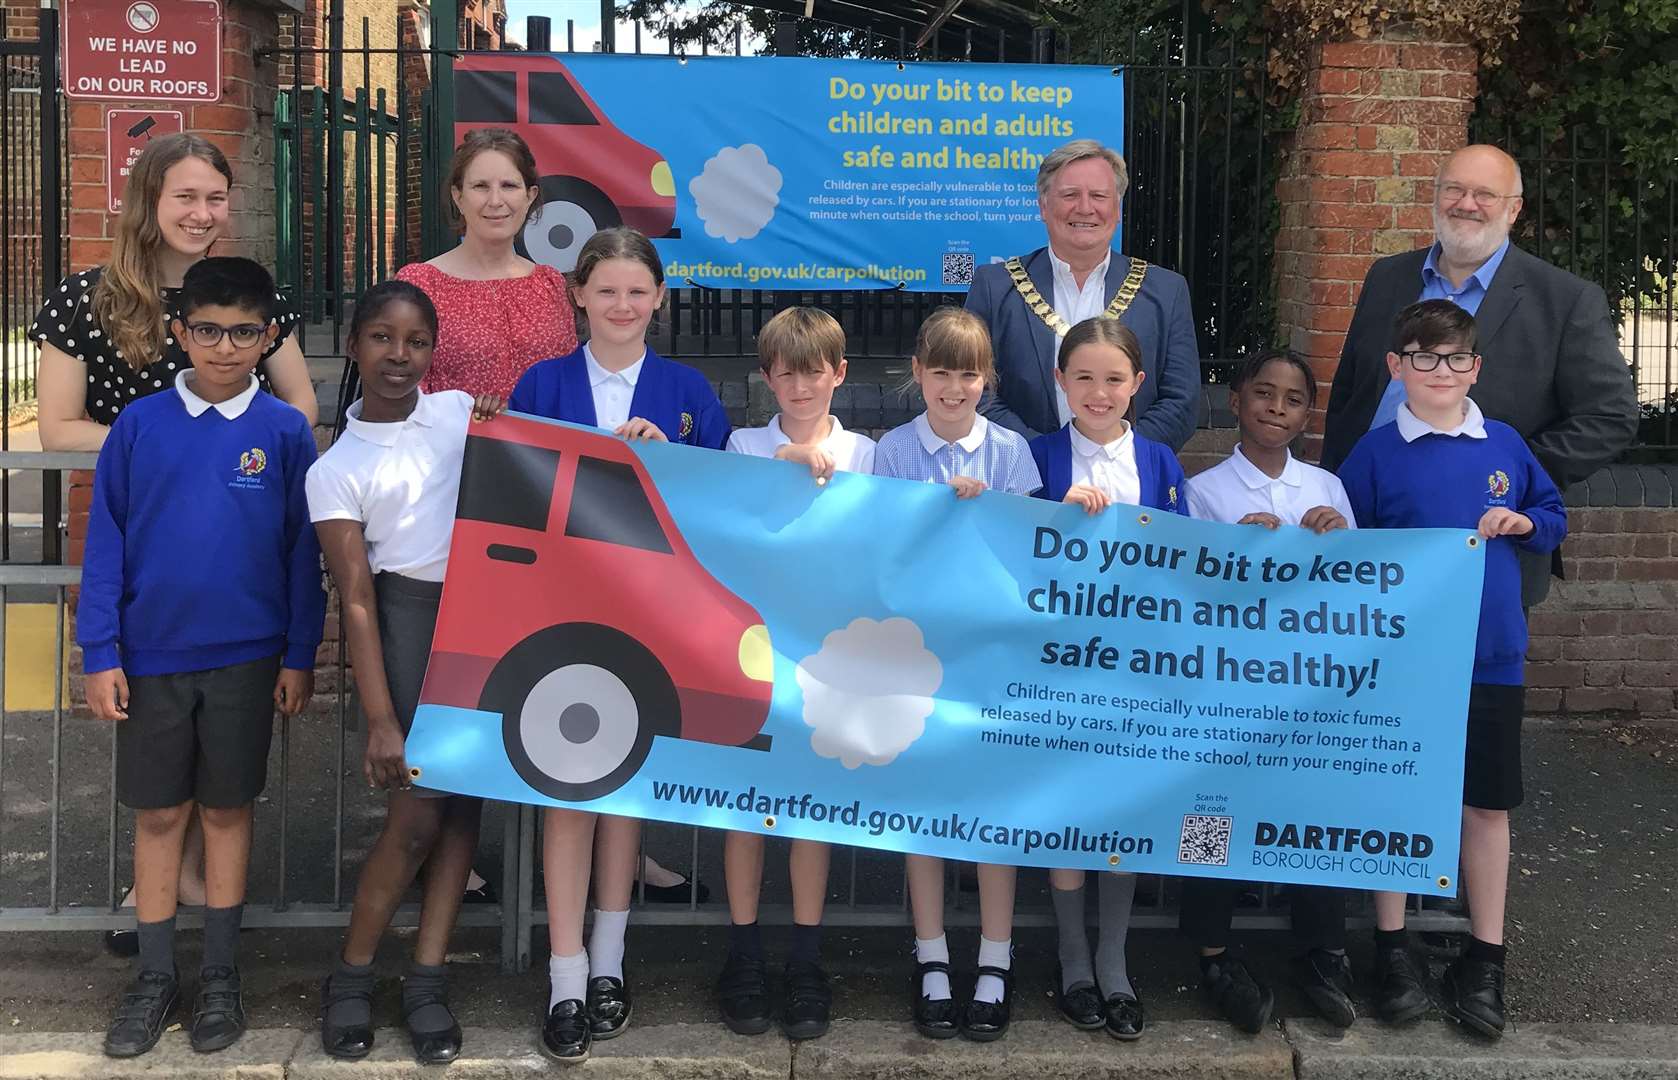 The project wants to educate drivers on air pollution. Picture: Dartford Borough Council